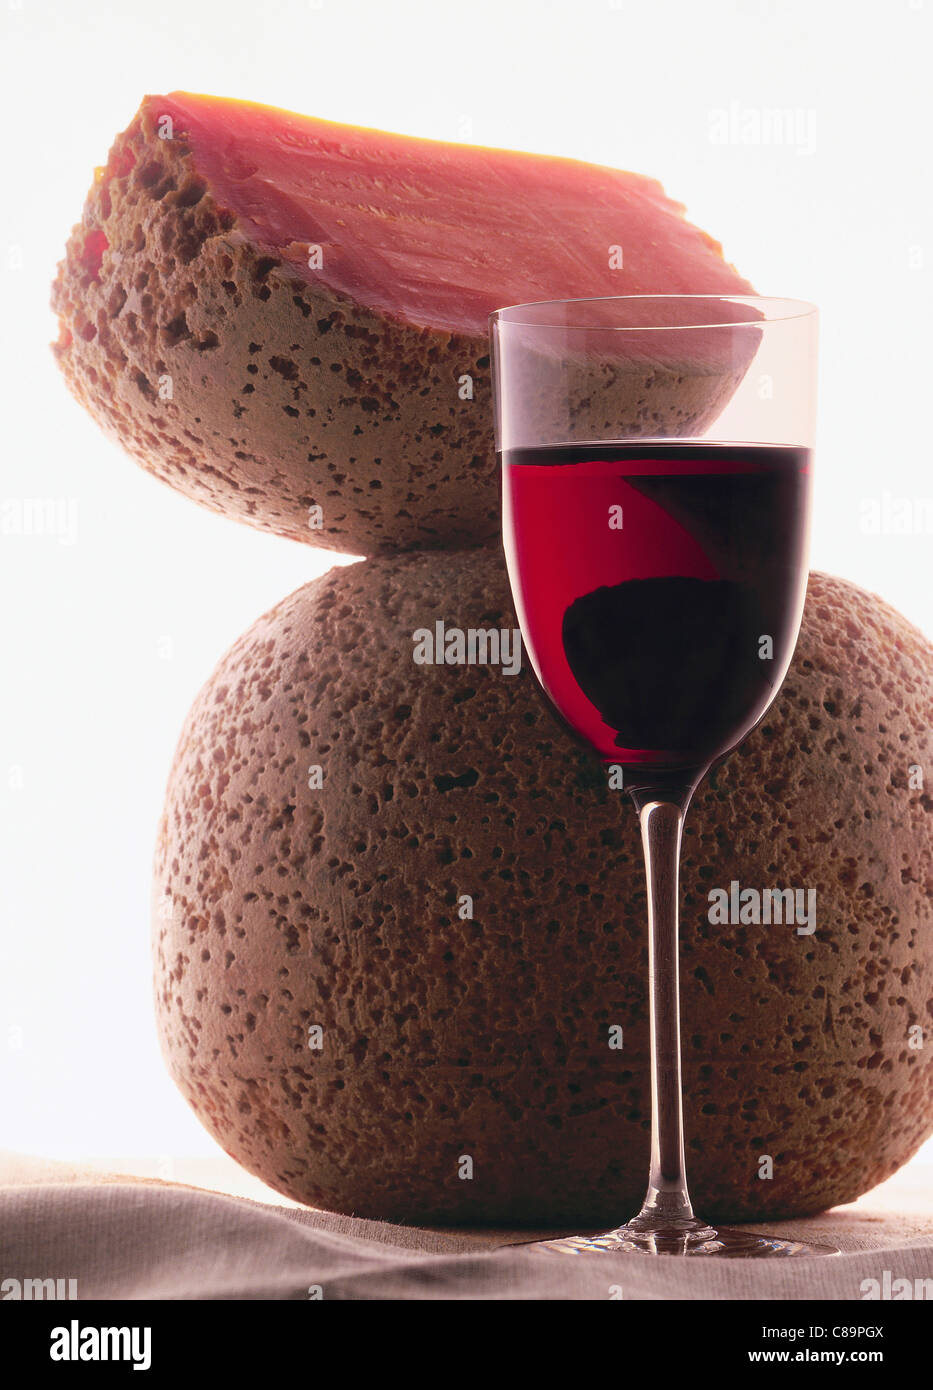 Mimolette cheese and glass of red wine Stock Photo